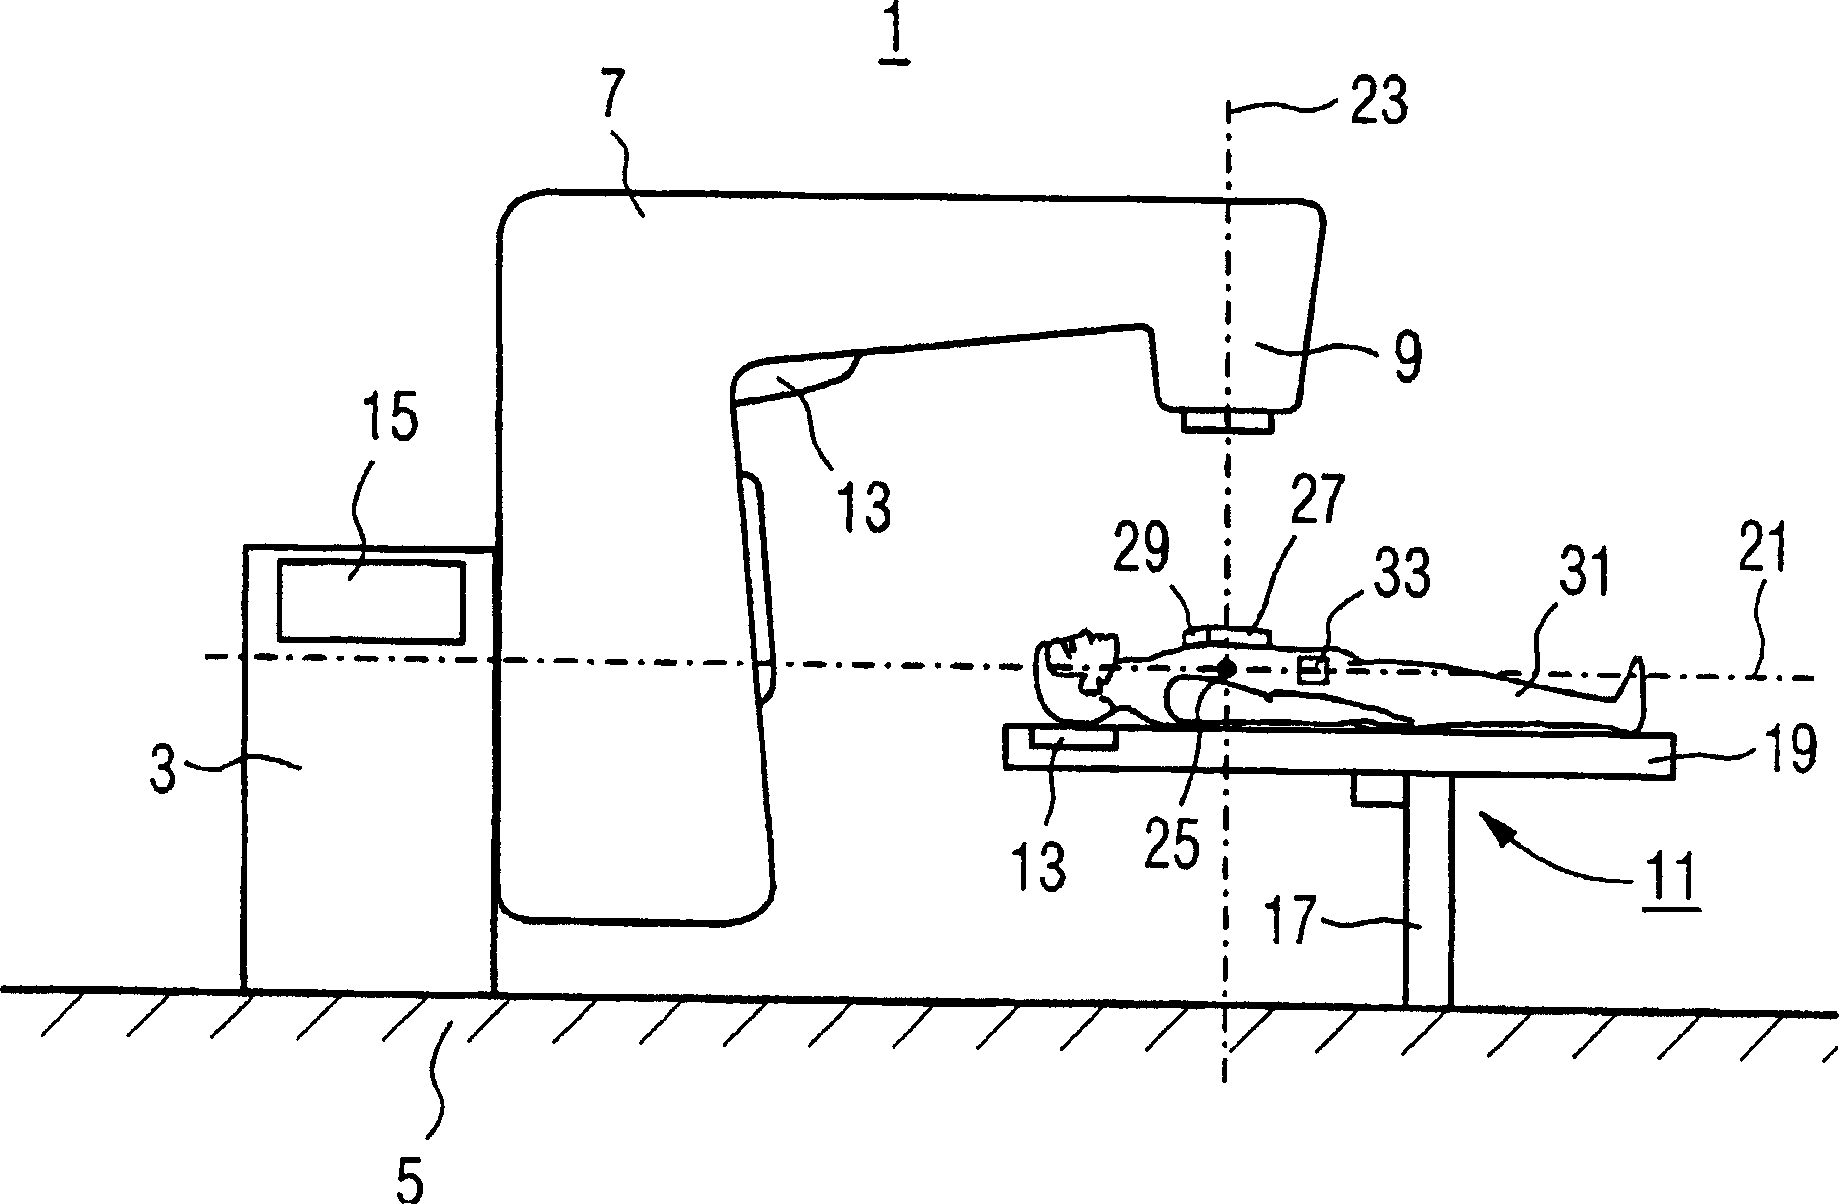 Identification device for medical equipment and patients